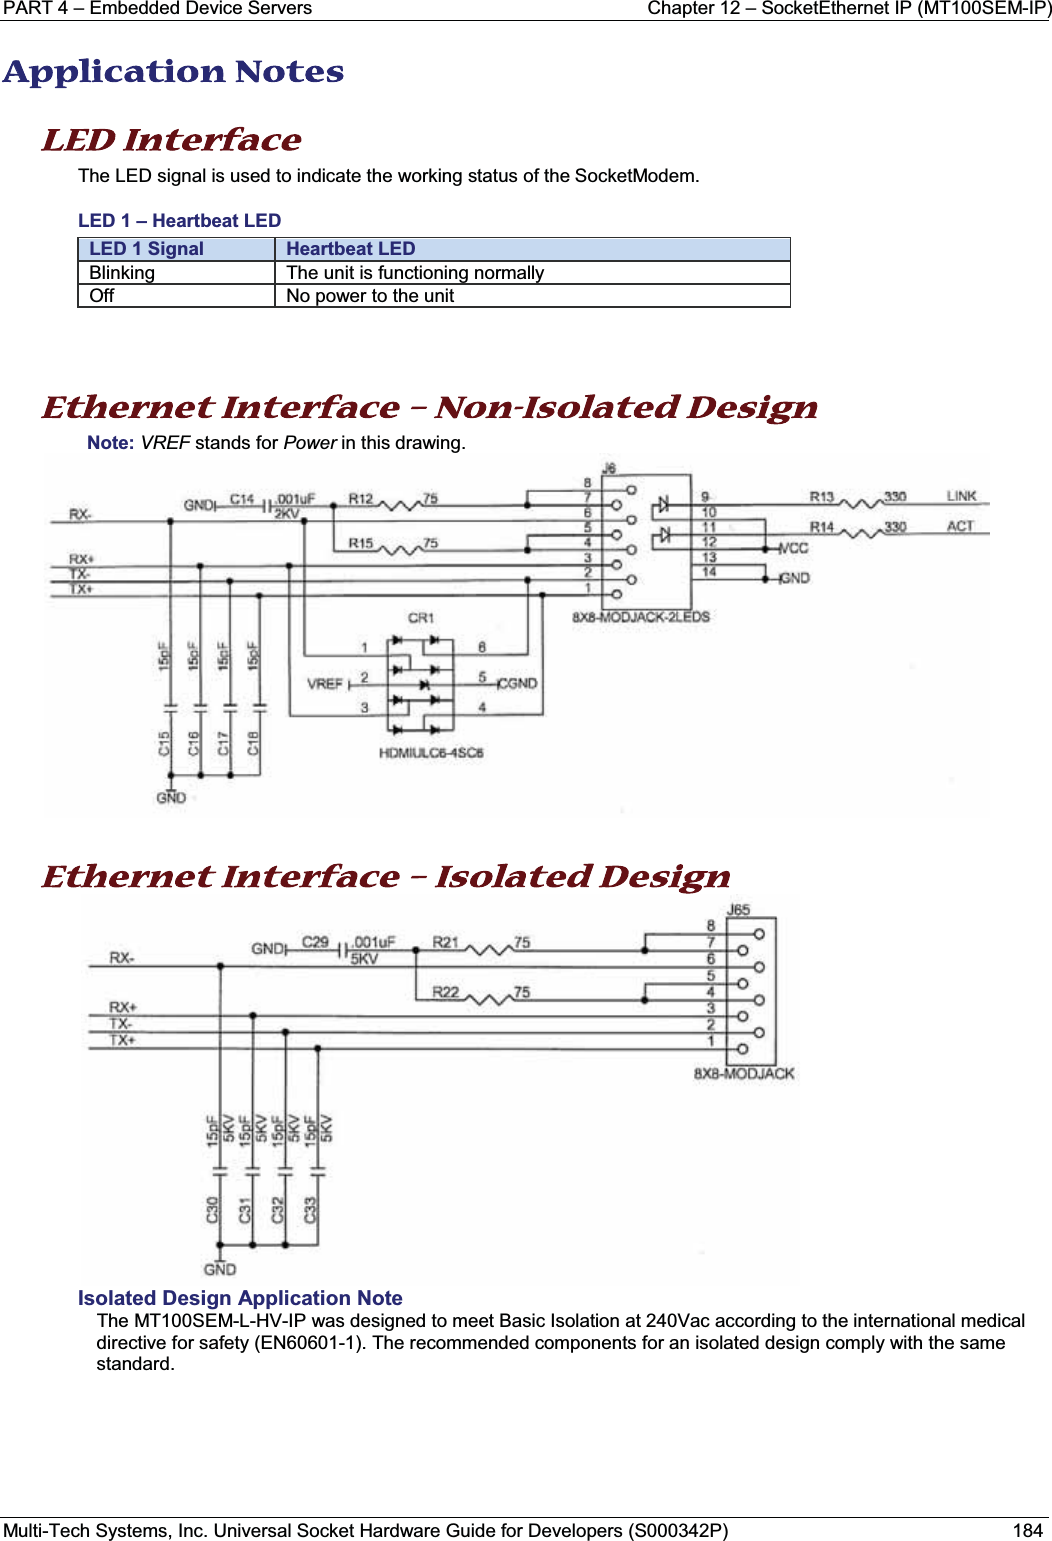 PART 4 – Embedded Device Servers Chapter 12 – SocketEthernet IP (MT100SEM-IP) Multi-Tech Systems, Inc. Universal Socket Hardware Guide for Developers (S000342P) 184AApplication Notes LED Interface  The LED signal is used to indicate the working status of the SocketModem.LED 1 – Heartbeat LEDLED 1 Signal Heartbeat LEDBlinking The unit is functioning normallyOff No power to the unitEthernet Interface – Non-Isolated Design Note: VREF stands for Power in this drawing.Ethernet Interface – Isolated Design Isolated Design Application NoteThe MT100SEM-L-HV-IP was designed to meet Basic Isolation at 240Vac according to the international medical directive for safety (EN60601-1). The recommended components for an isolated design comply with the same standard.